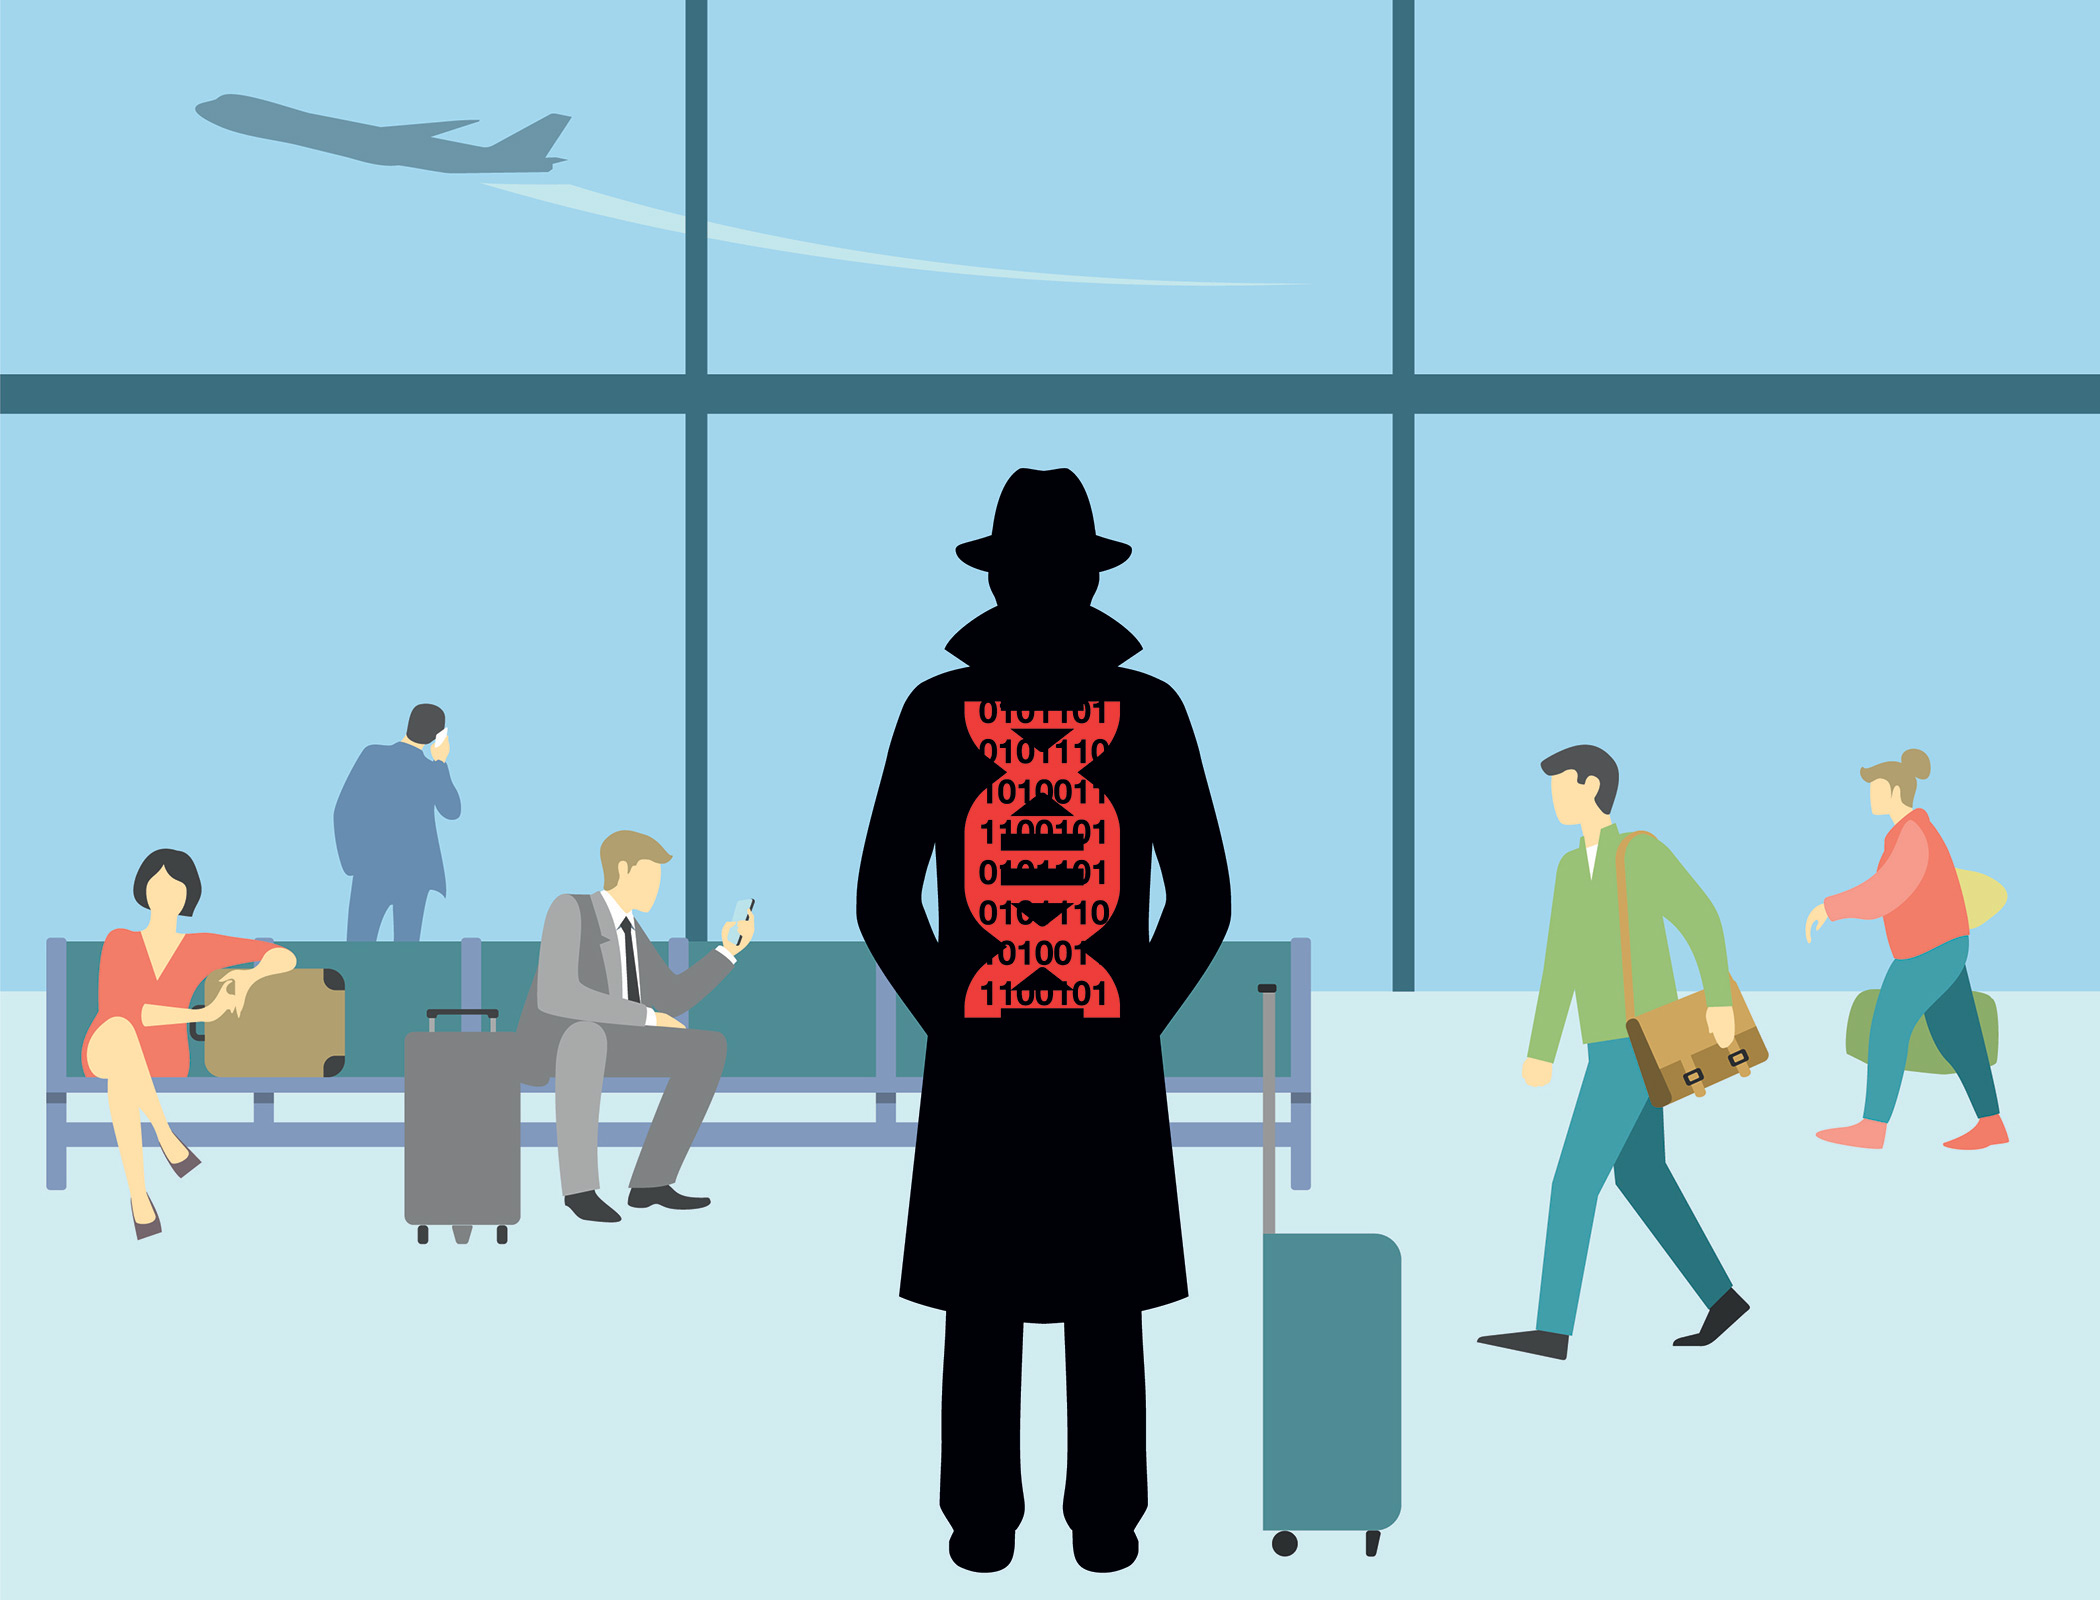 Dear Evil Engineer: Could I smuggle military secrets in my DNA?